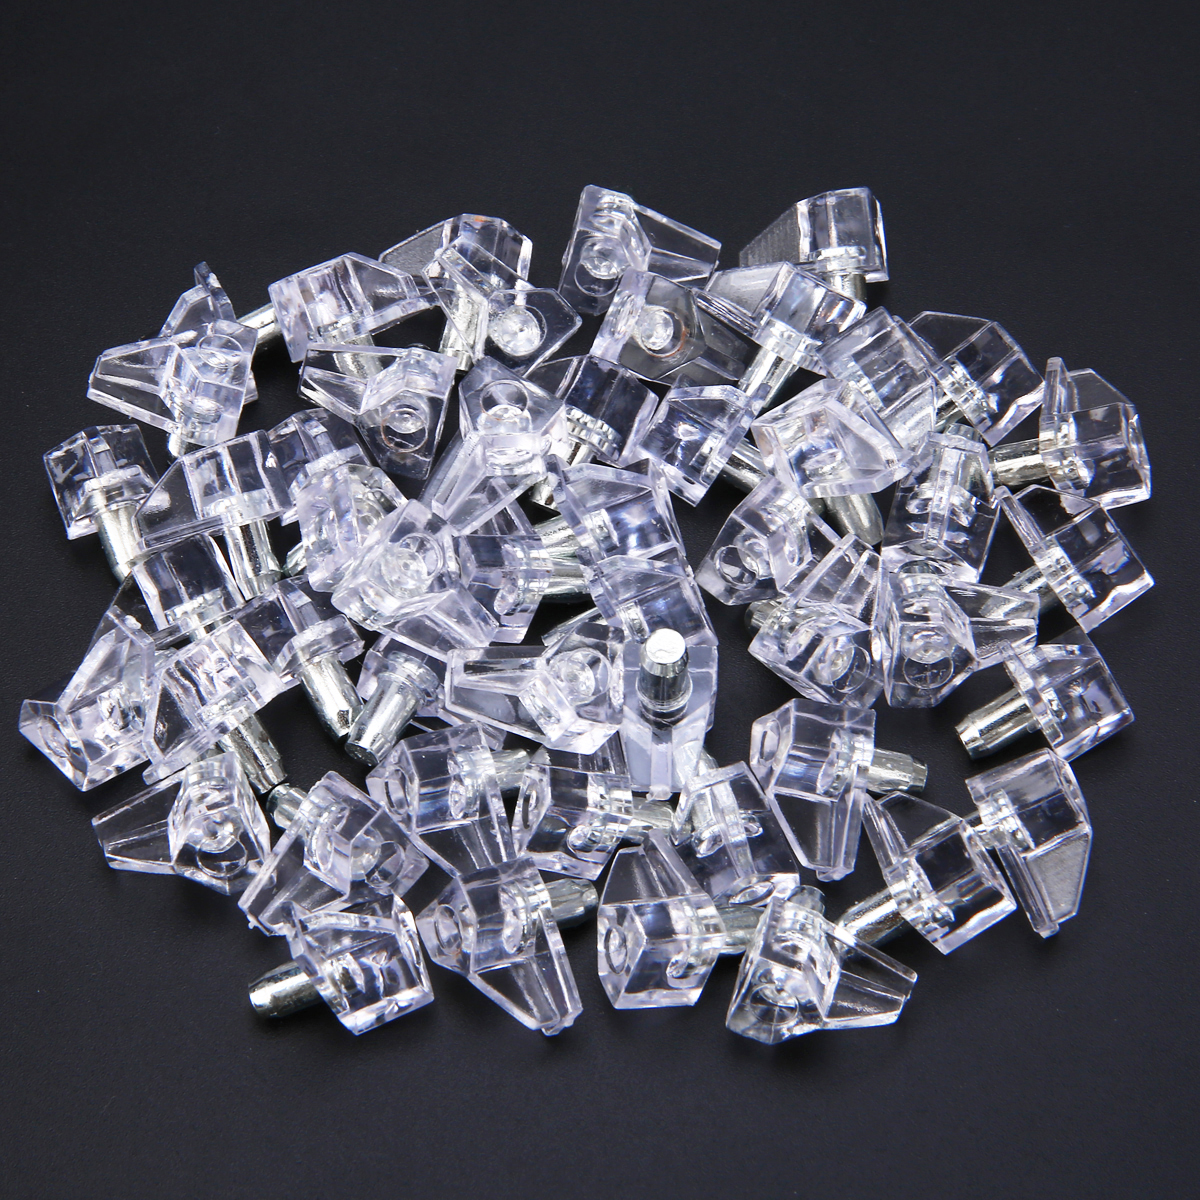 50Pcs Shelf Supports Studs Pegs Metal 5mm Pin Shelves Seperator Fixed Cabinet Cupboard Furniture Bracket Support Holder For Kitc